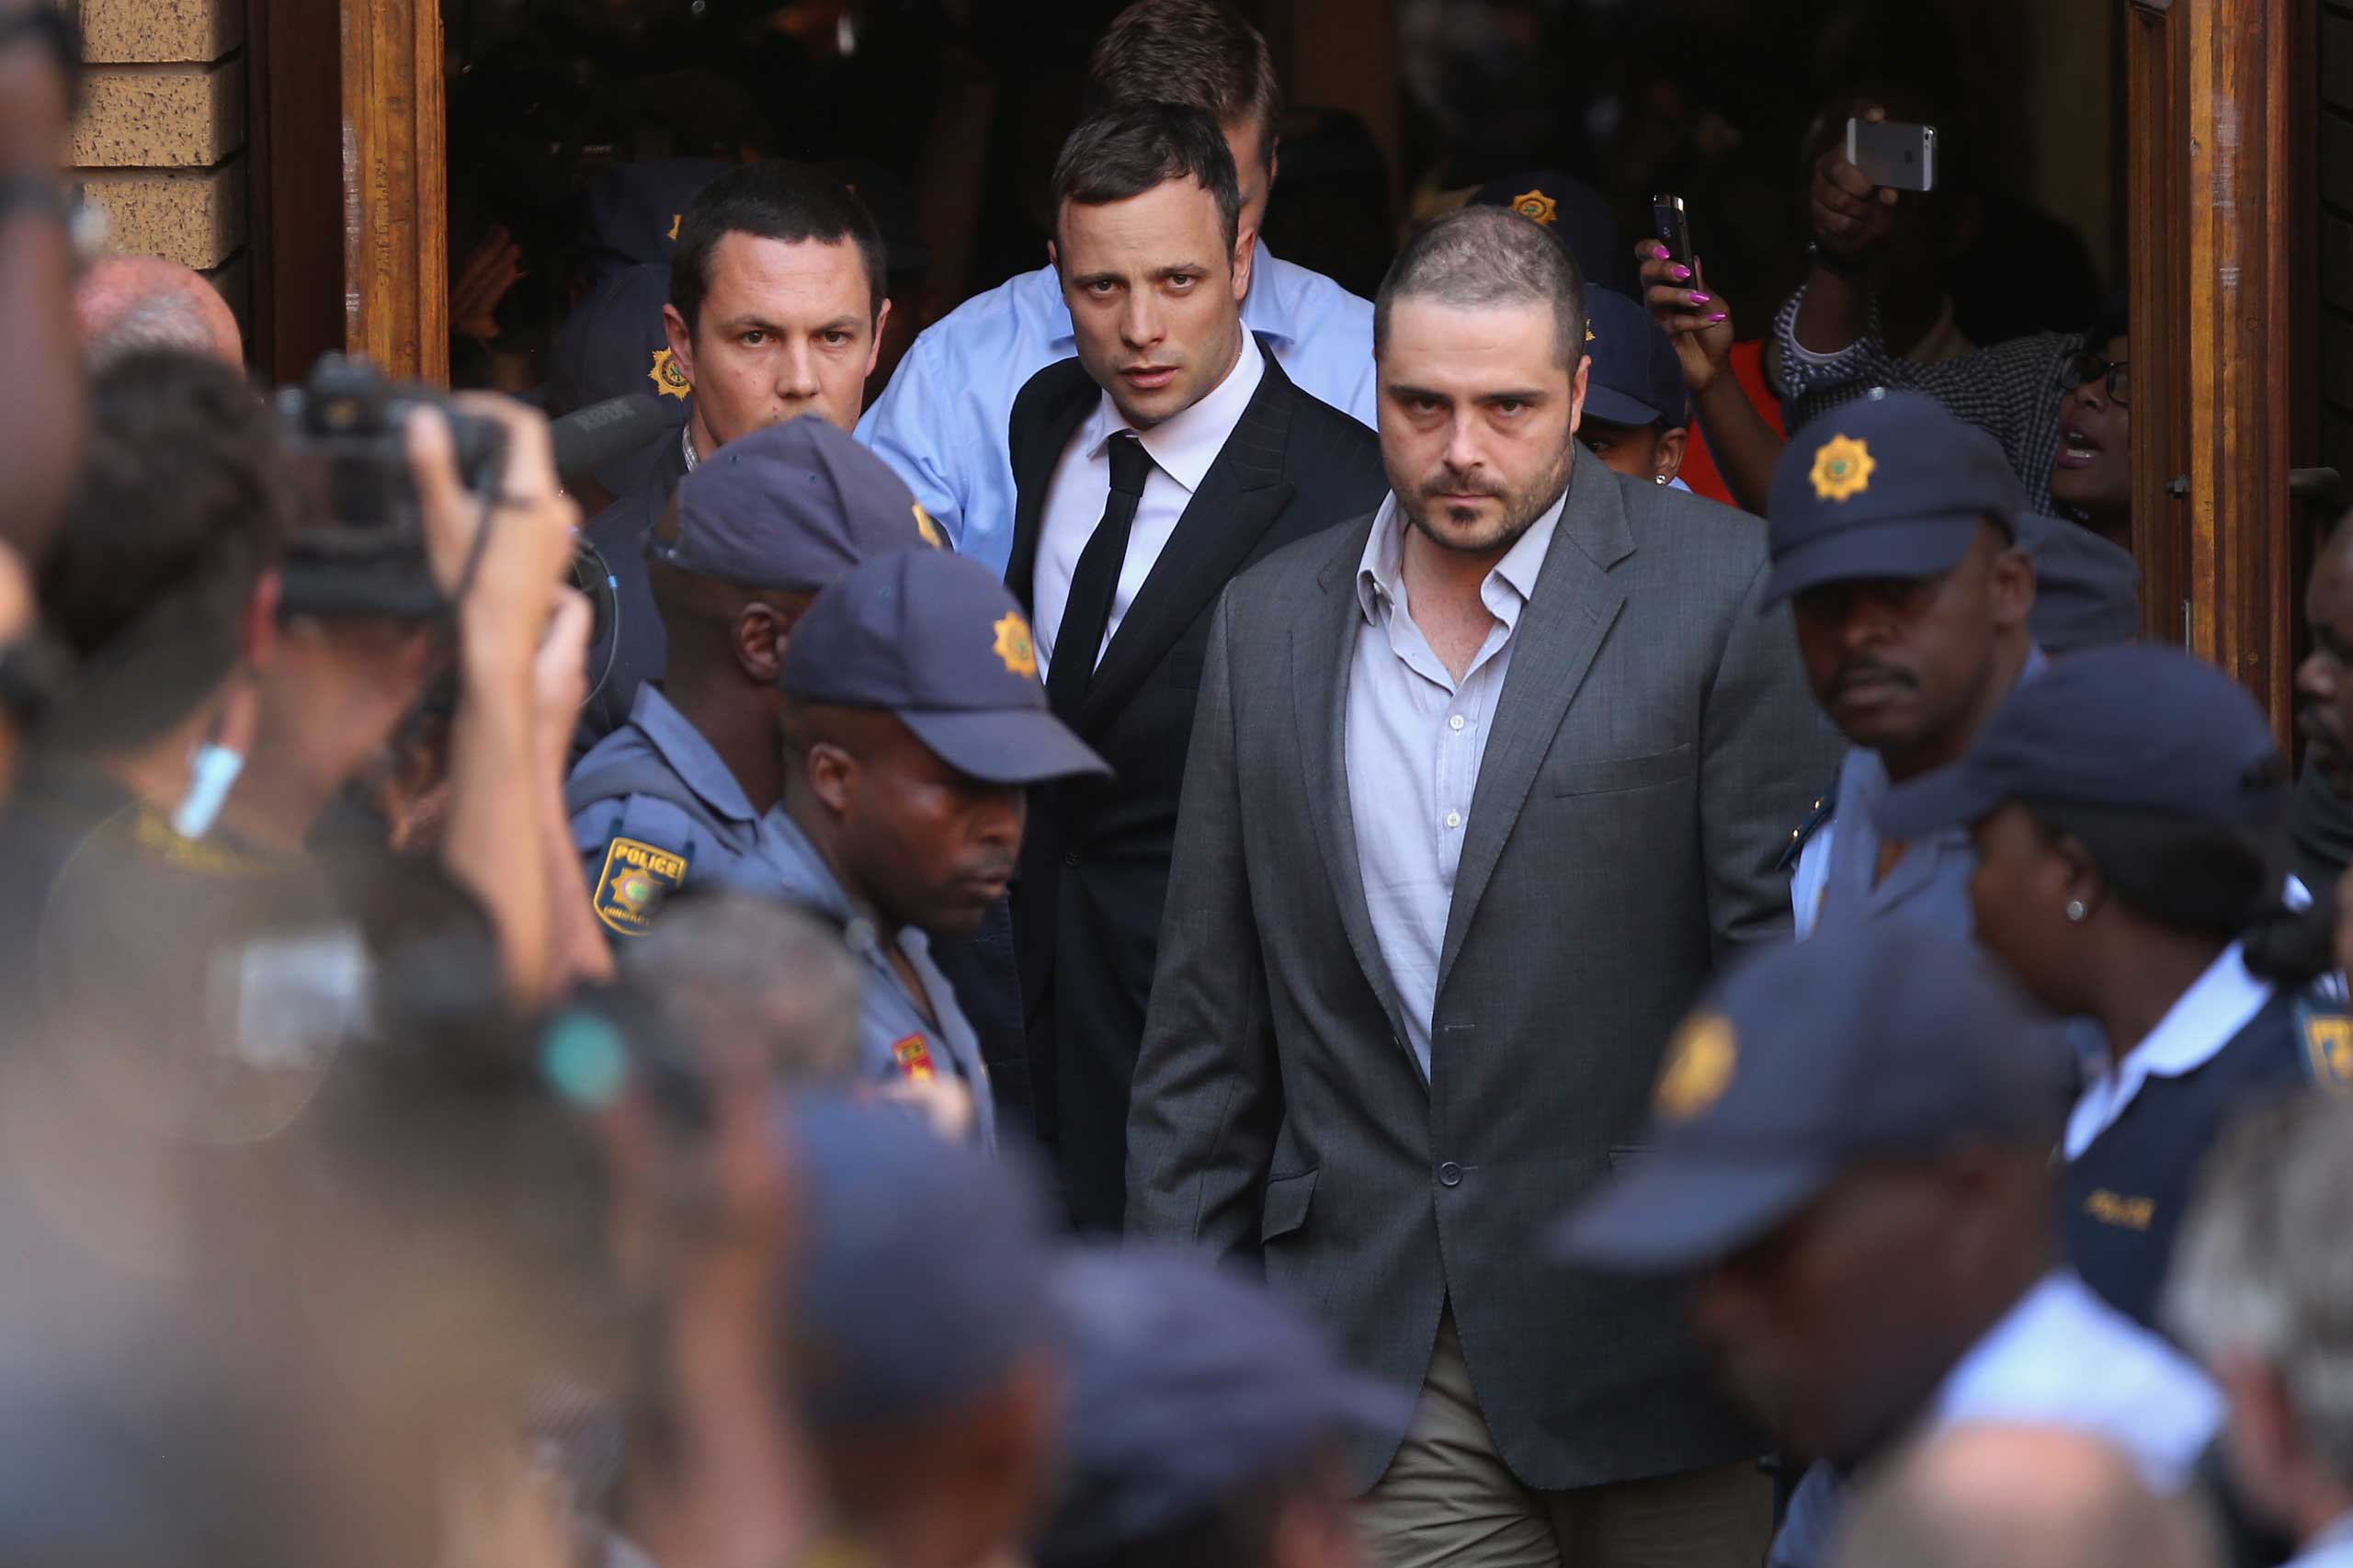 Oscar Pistorius leaves North Gauteng High Court in Pretoria, South Africa, on Sept. 11, 2014. (Christopher Furlong—Getty Images)